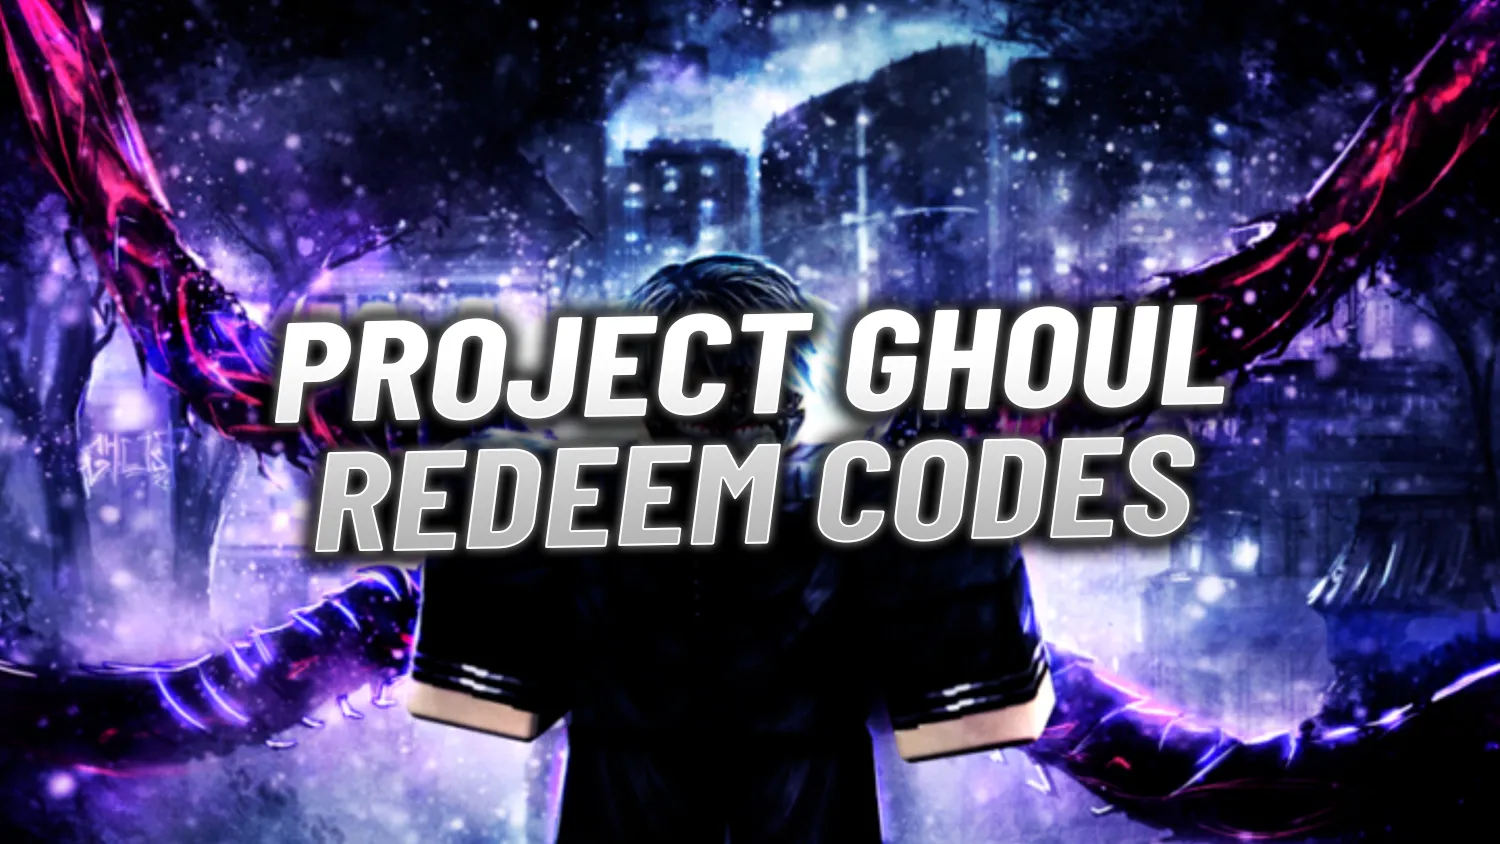 Project Ghoul Codes on